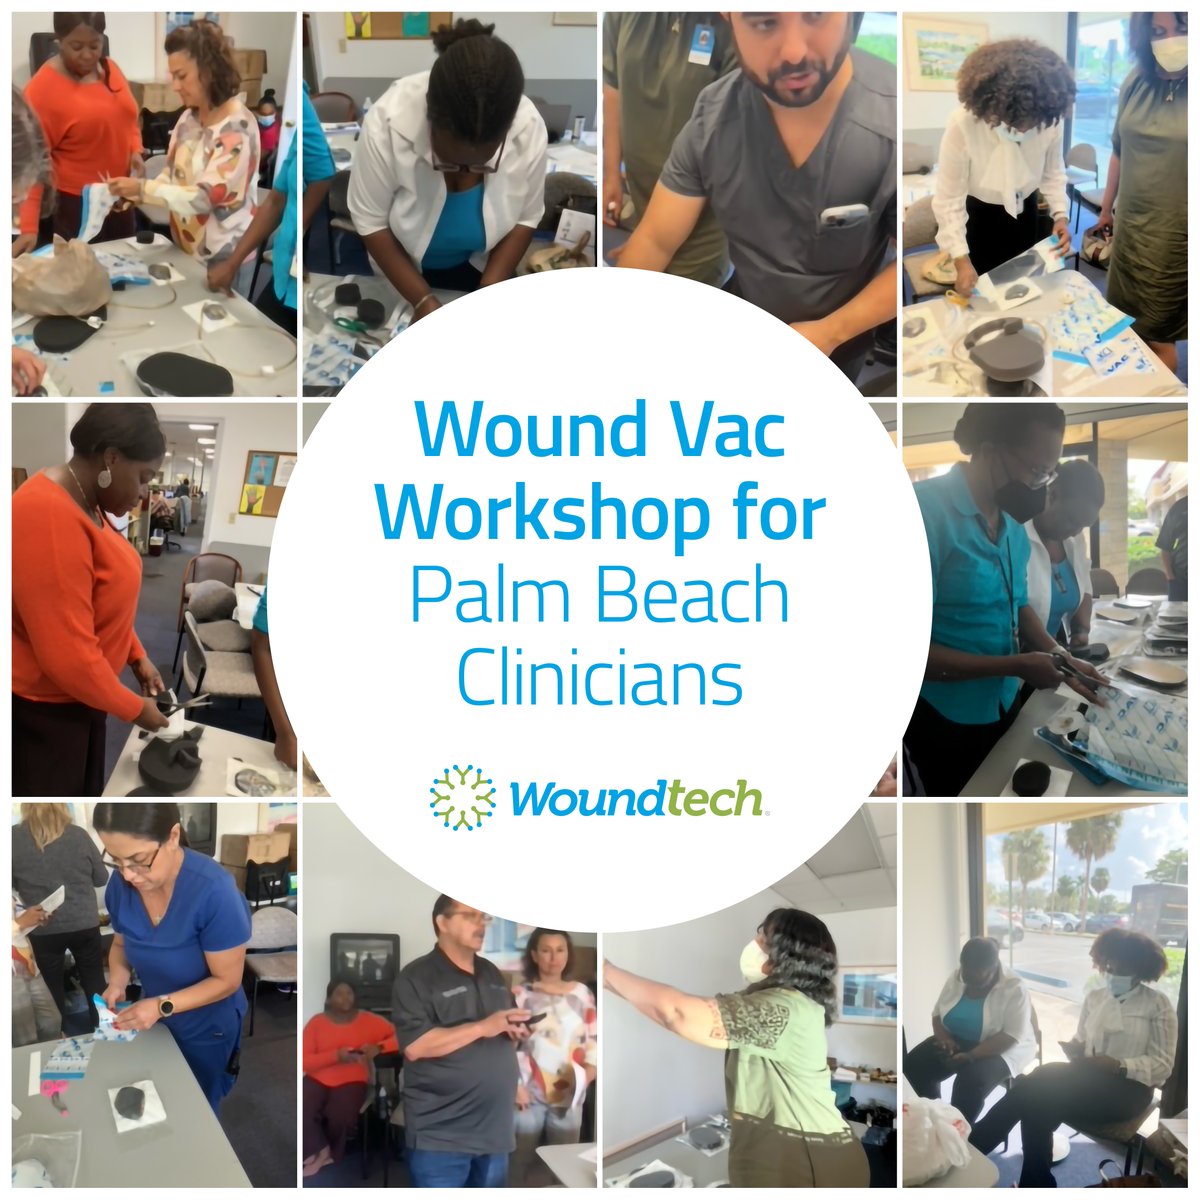 Our advanced wound care clinicians consistently stay up-to-date with wound care best practices by participating in continued education and training. Great job Palm Beach Clinicians! 

#woundtech #advancedwoundcare #continuededucation #workshop